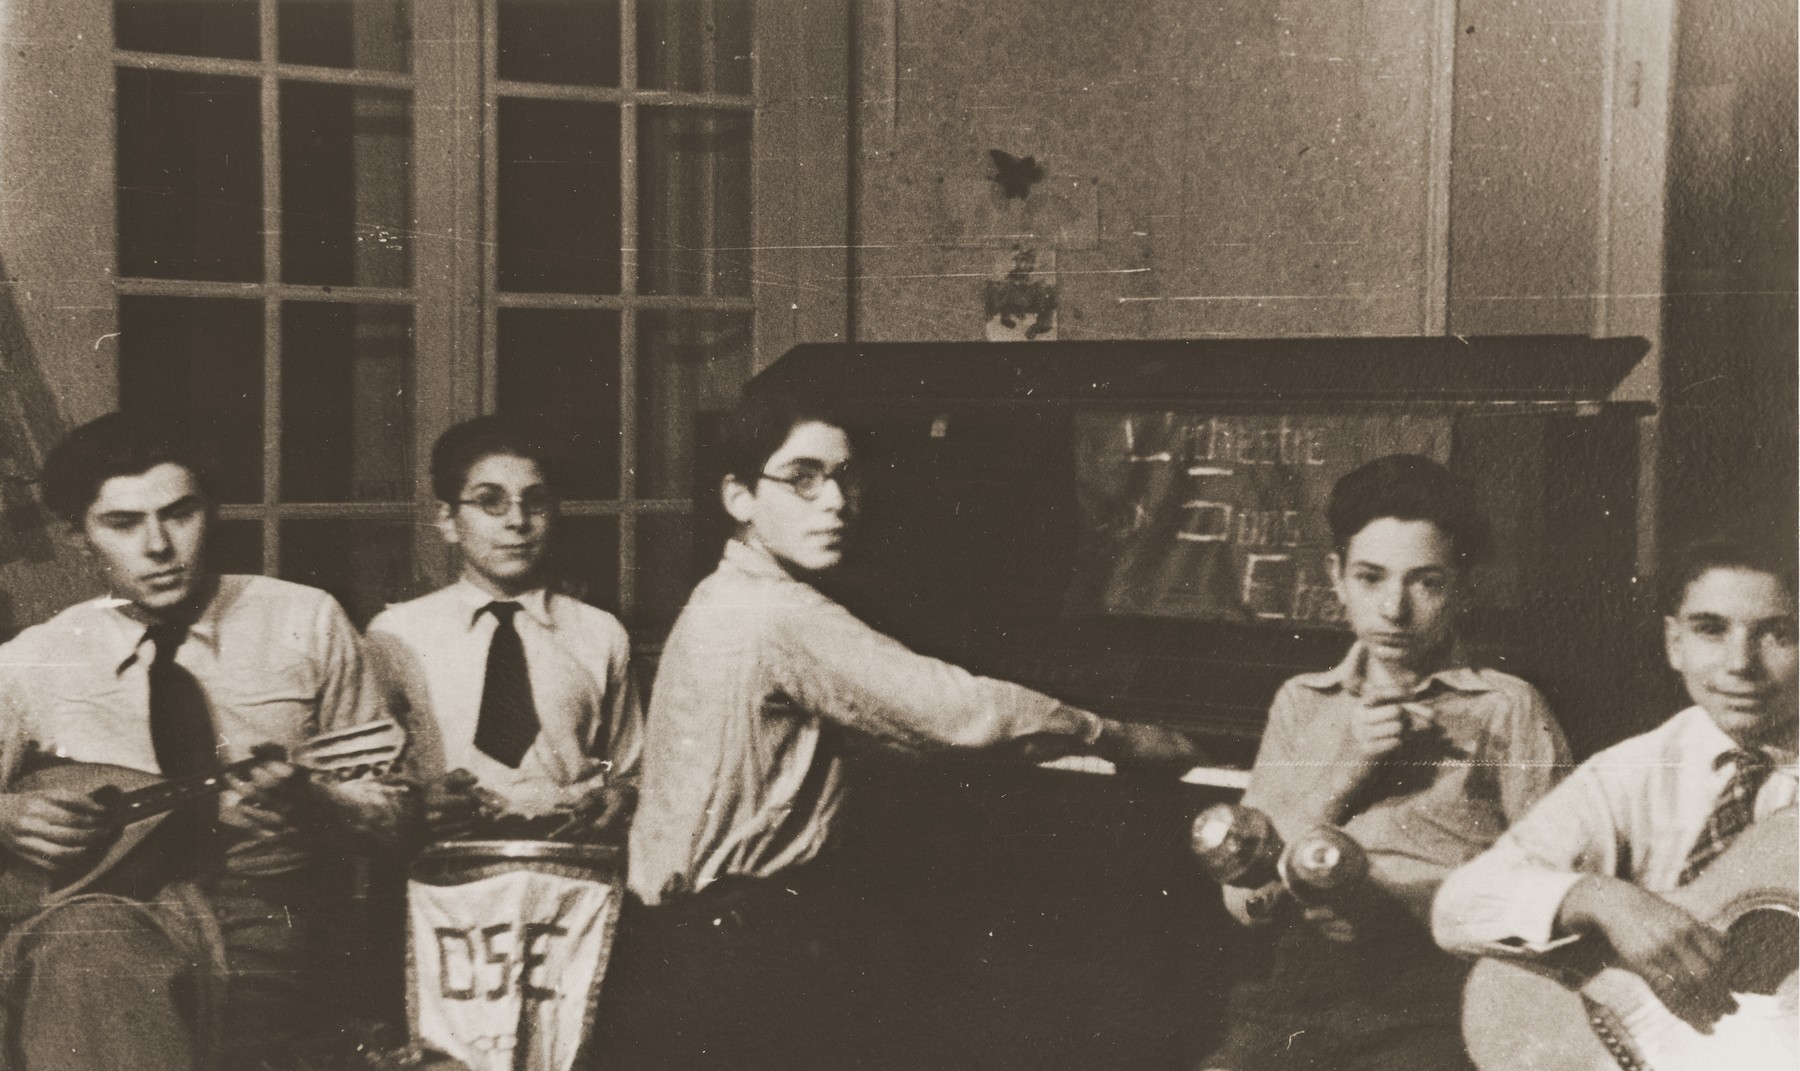 Members of a youth orchestra perform at the Château de Chabannes children's home.  The home was sponsored by the OSE (Oeuvre de secours aux Enfants).

Pictured from left to right are Marjan Szturm, Armand Chochenbaum, Walter Herzig, Gérard Alexander and Peter Marcuse.